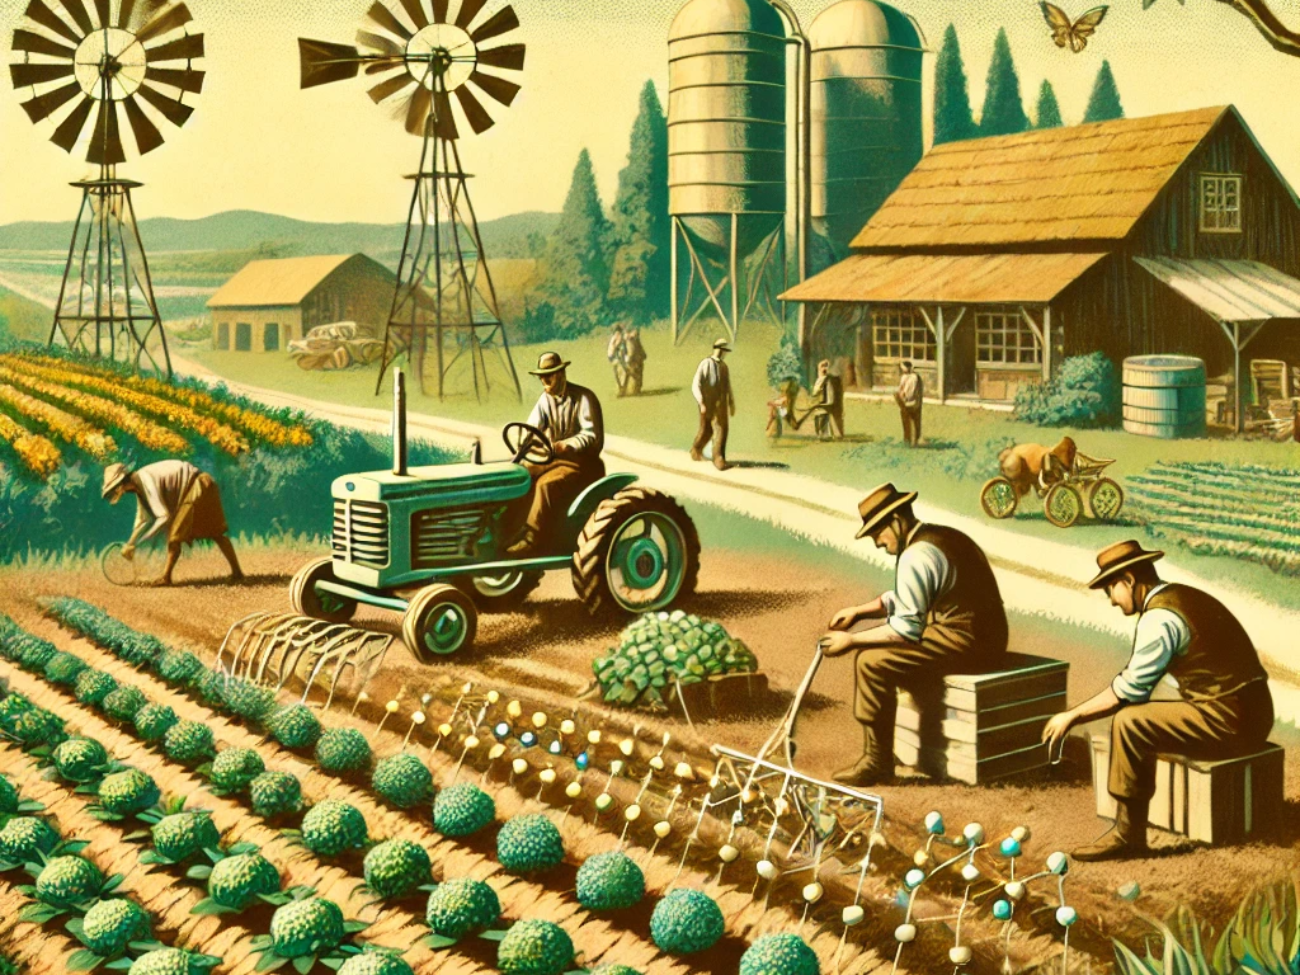 DALL·E 2024-06-25 16.15.04 - 1960s style illustration showing the practical application of nanotechnology in agriculture at a farm. The scene includes farmers using nanotechnology